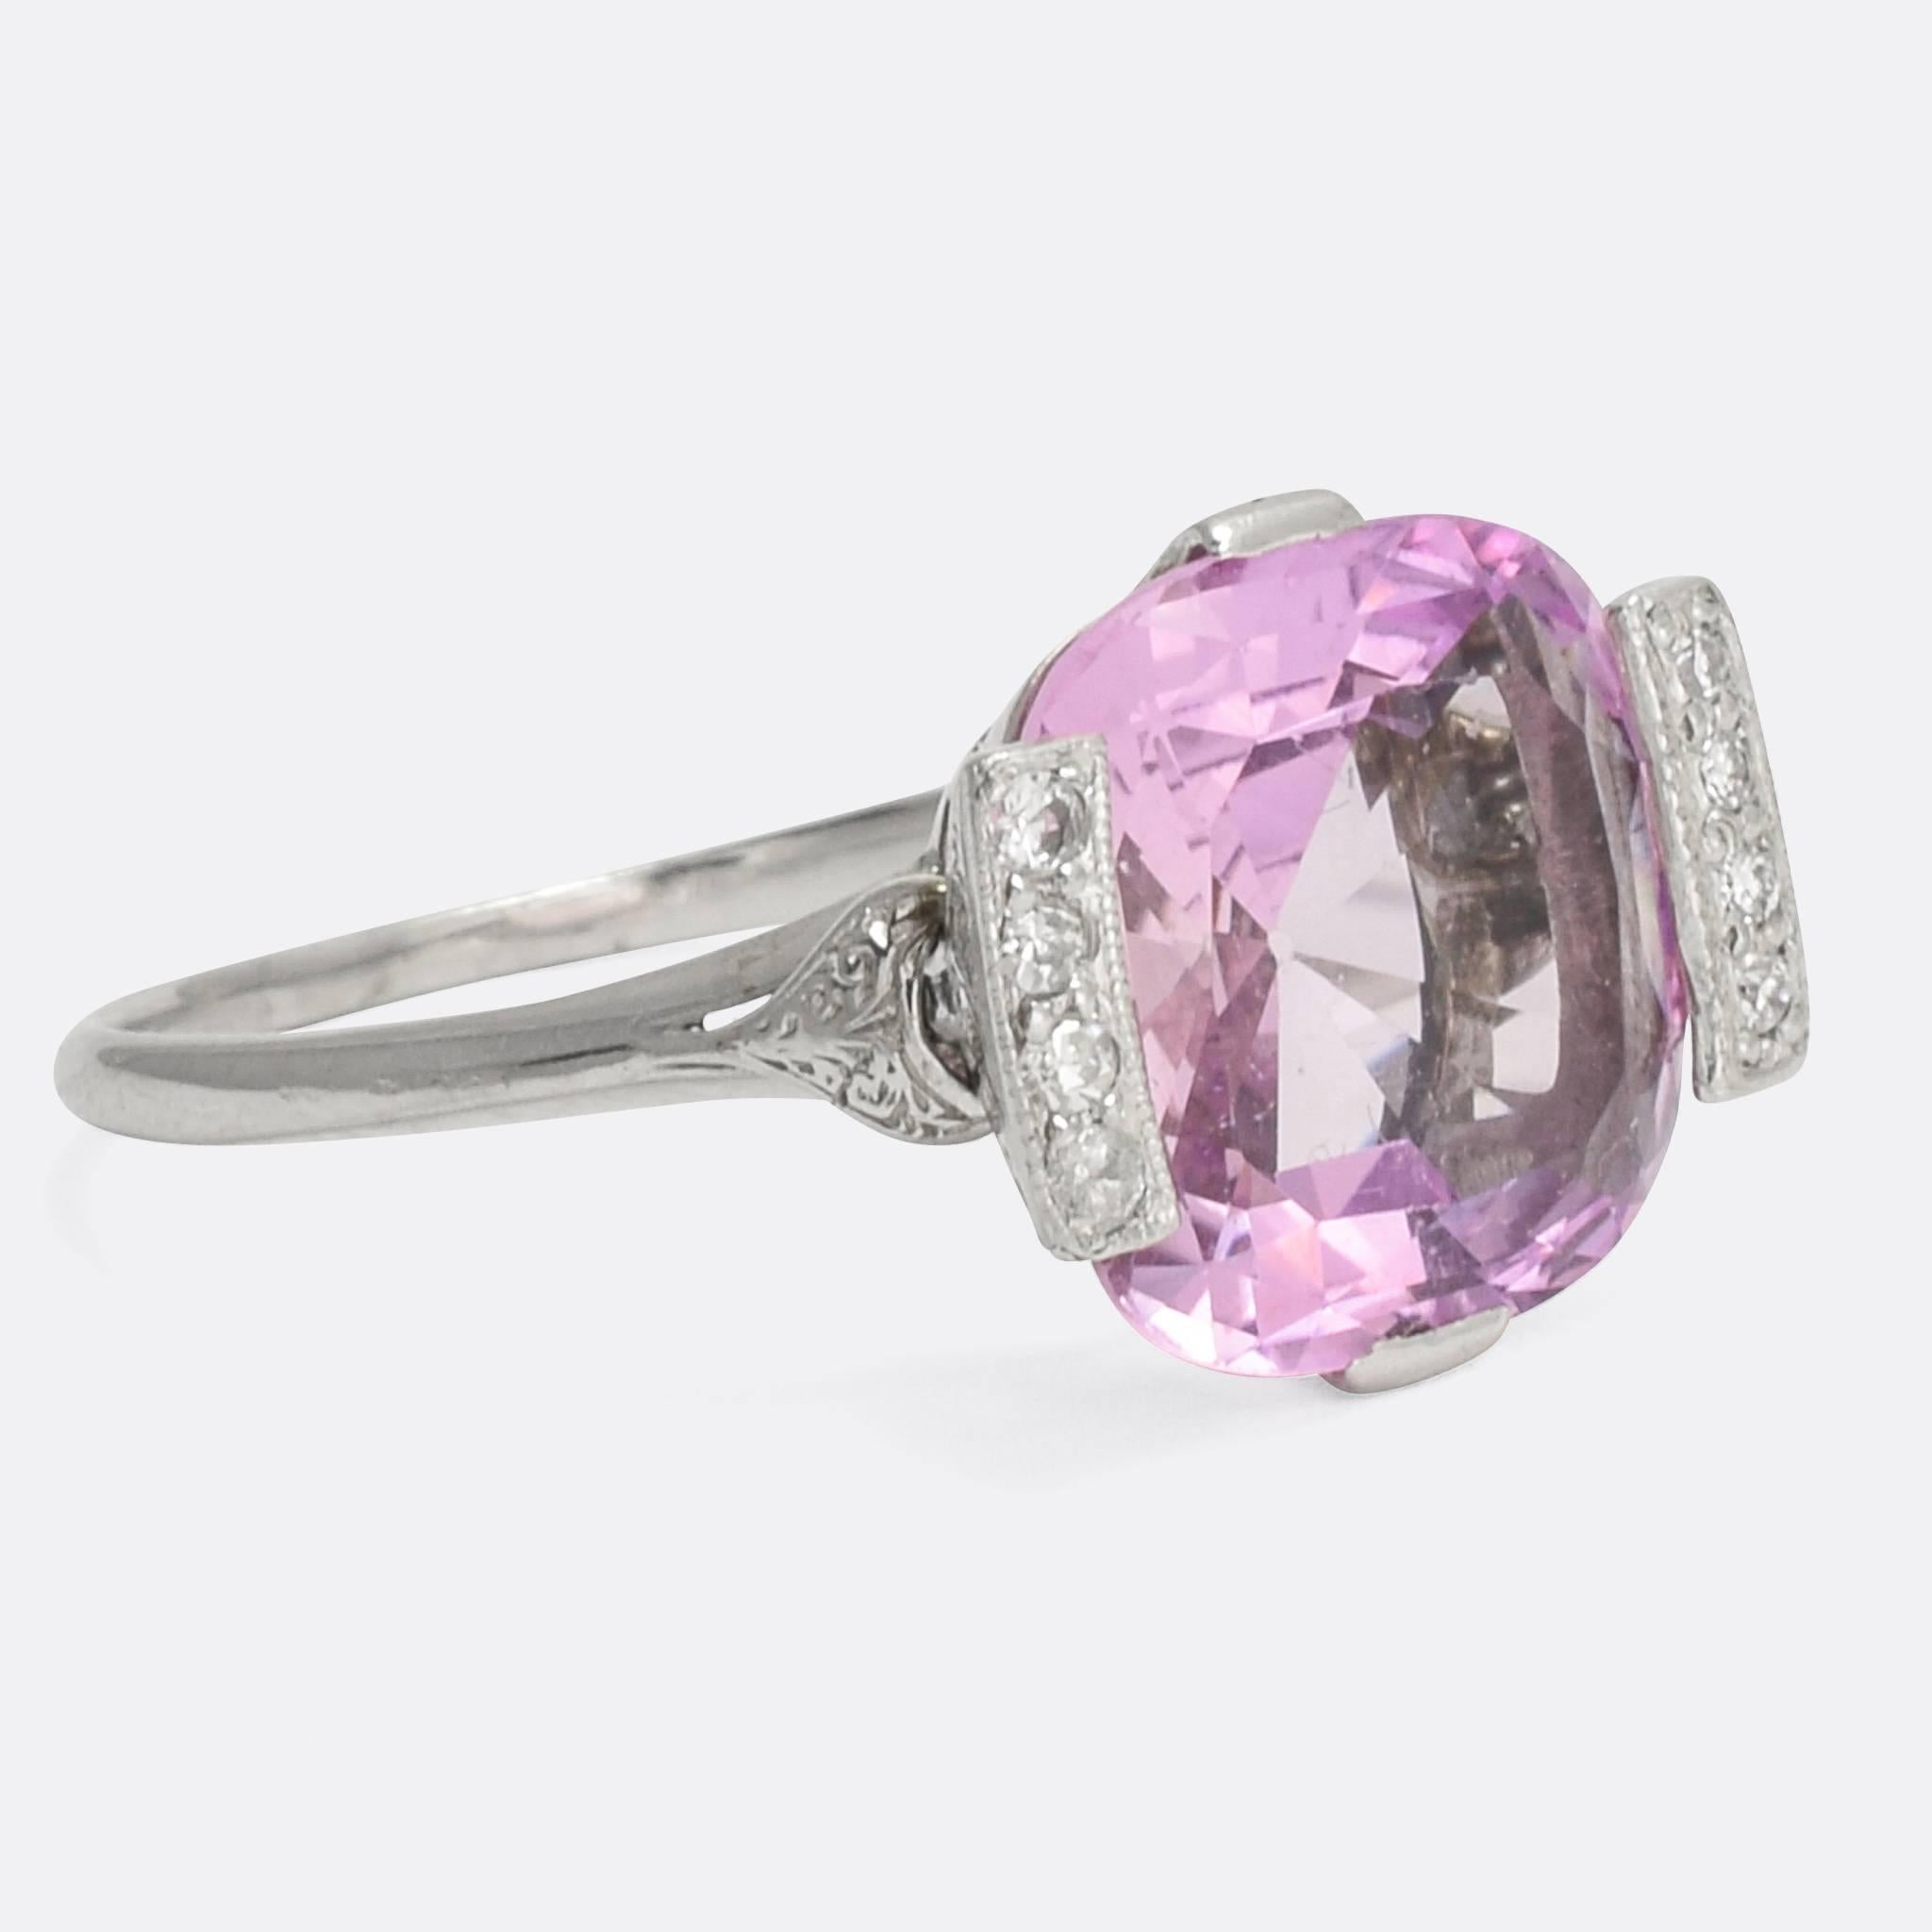 A spectacular Pink Topaz cocktail ring dating from the Art Deco era, circa 1920. The principal 6.5 carat stone is a dreamy pale pink colour, framed by two rows of white diamonds in millegrain settings. Modelled in platinum throughout, with unusual